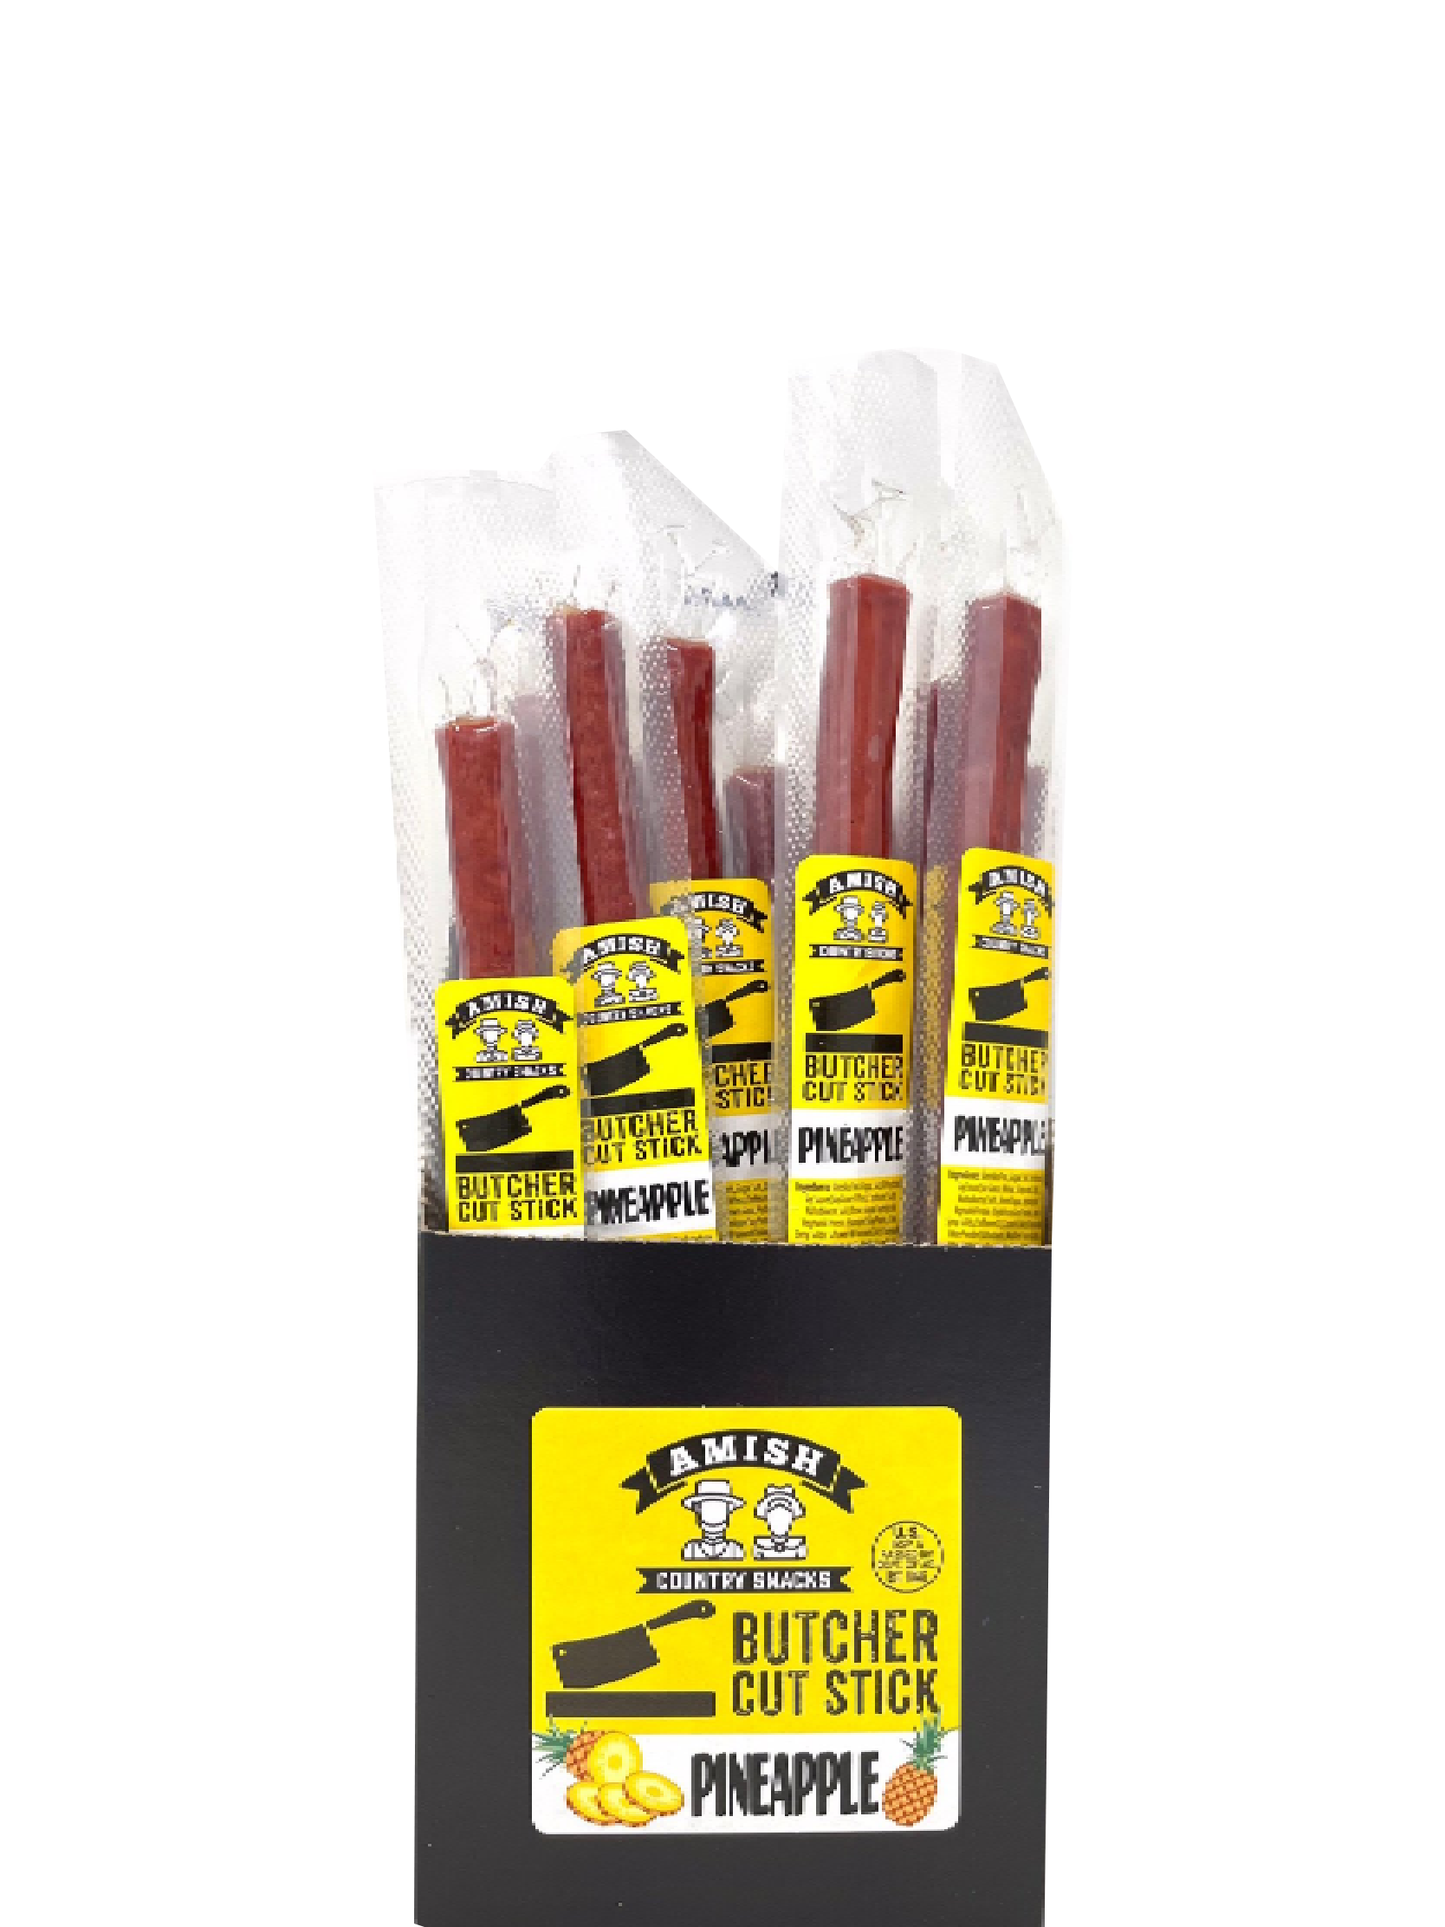 Butcher Cut Pineapple Meat Sticks  24 count box - Amish Country Snacks